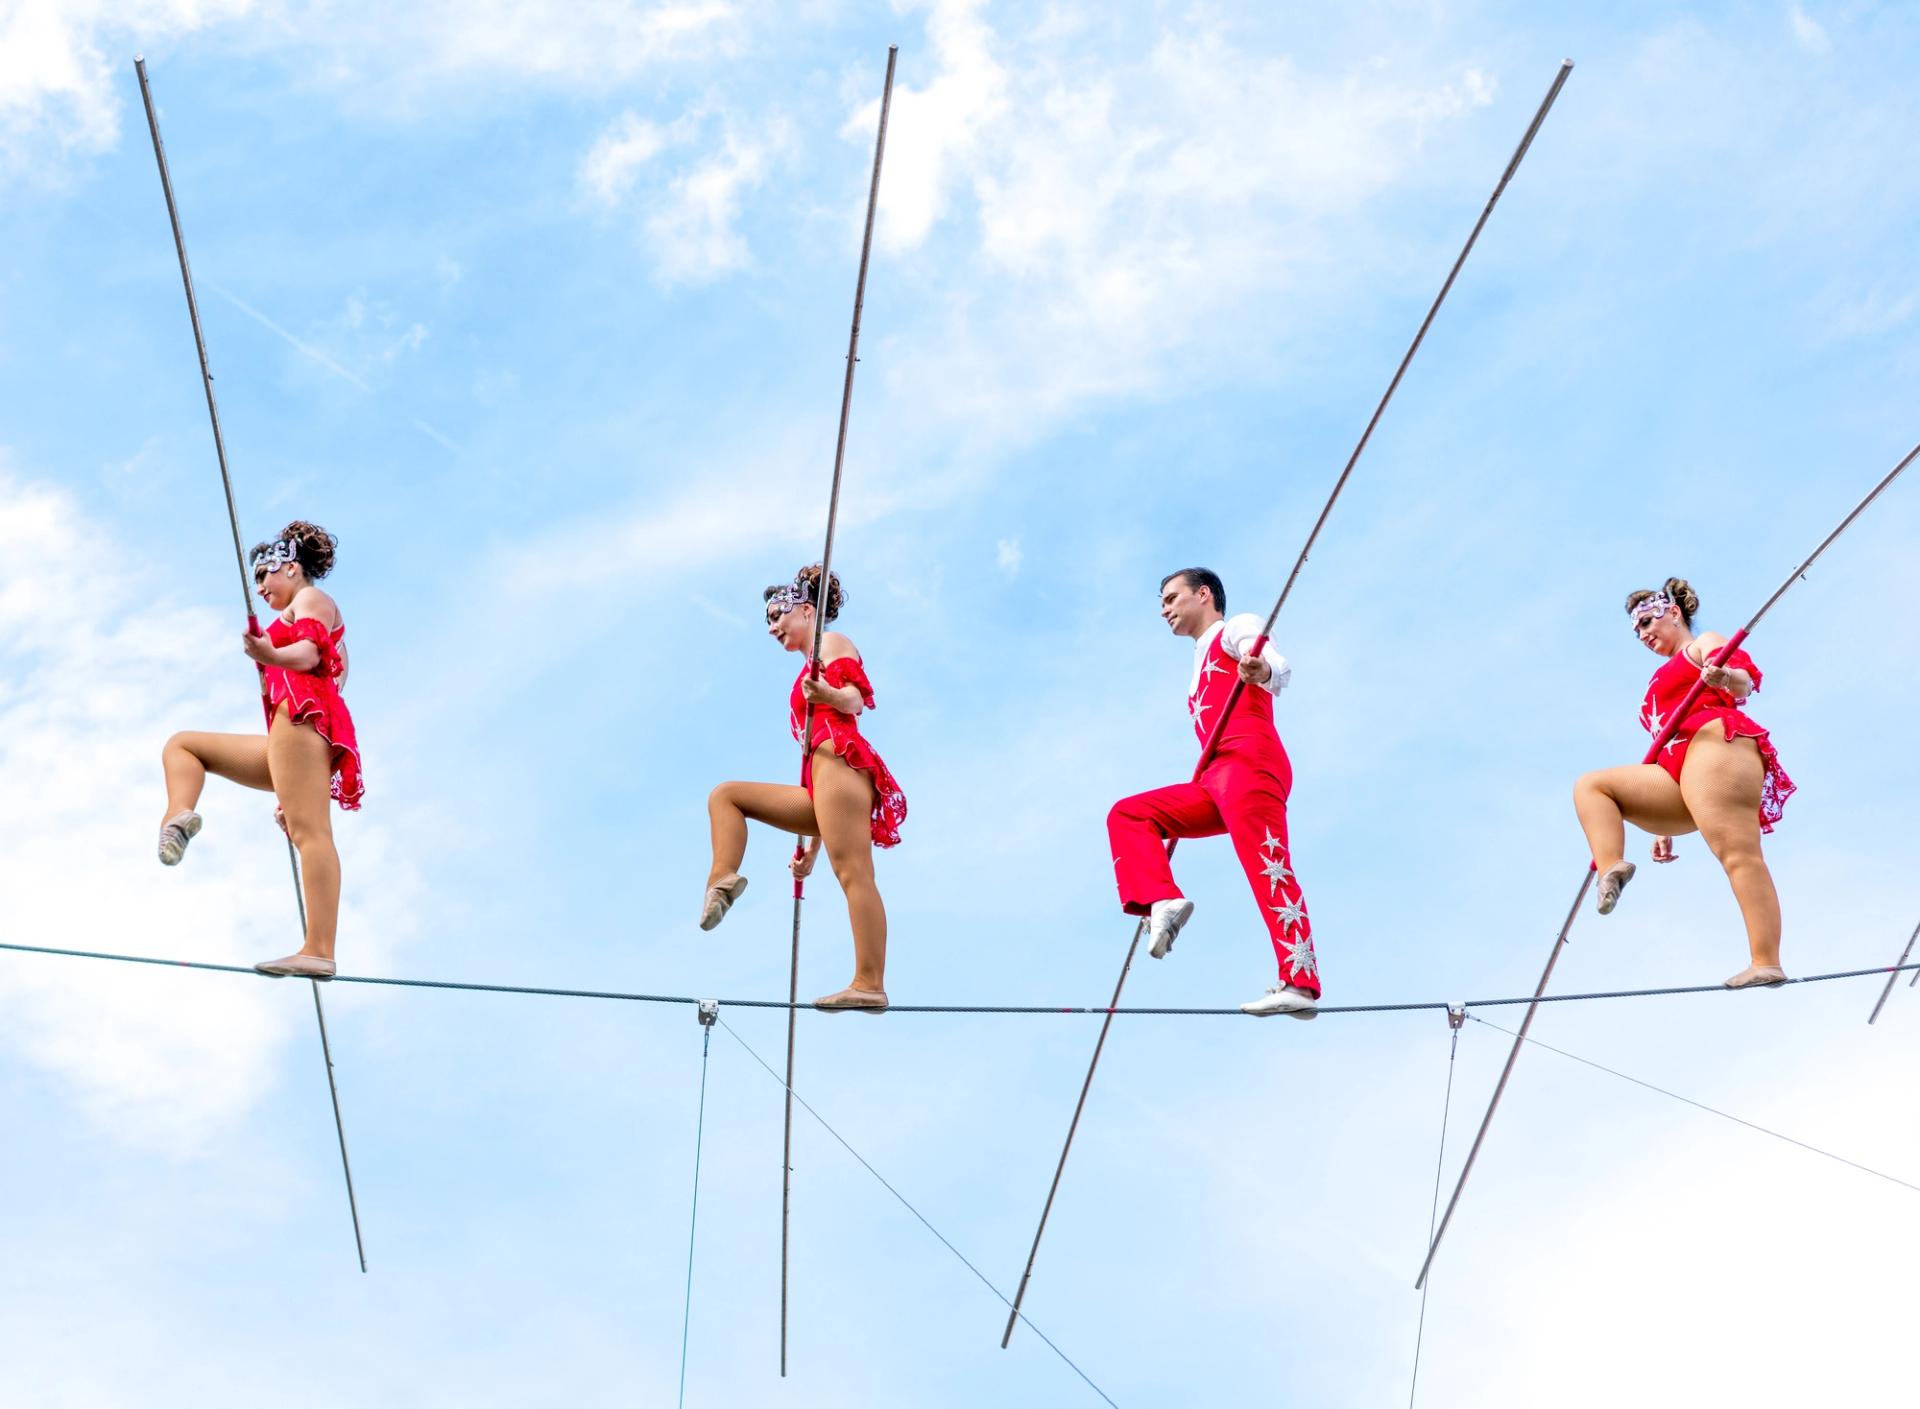 Four artists balancing on a tight-rope